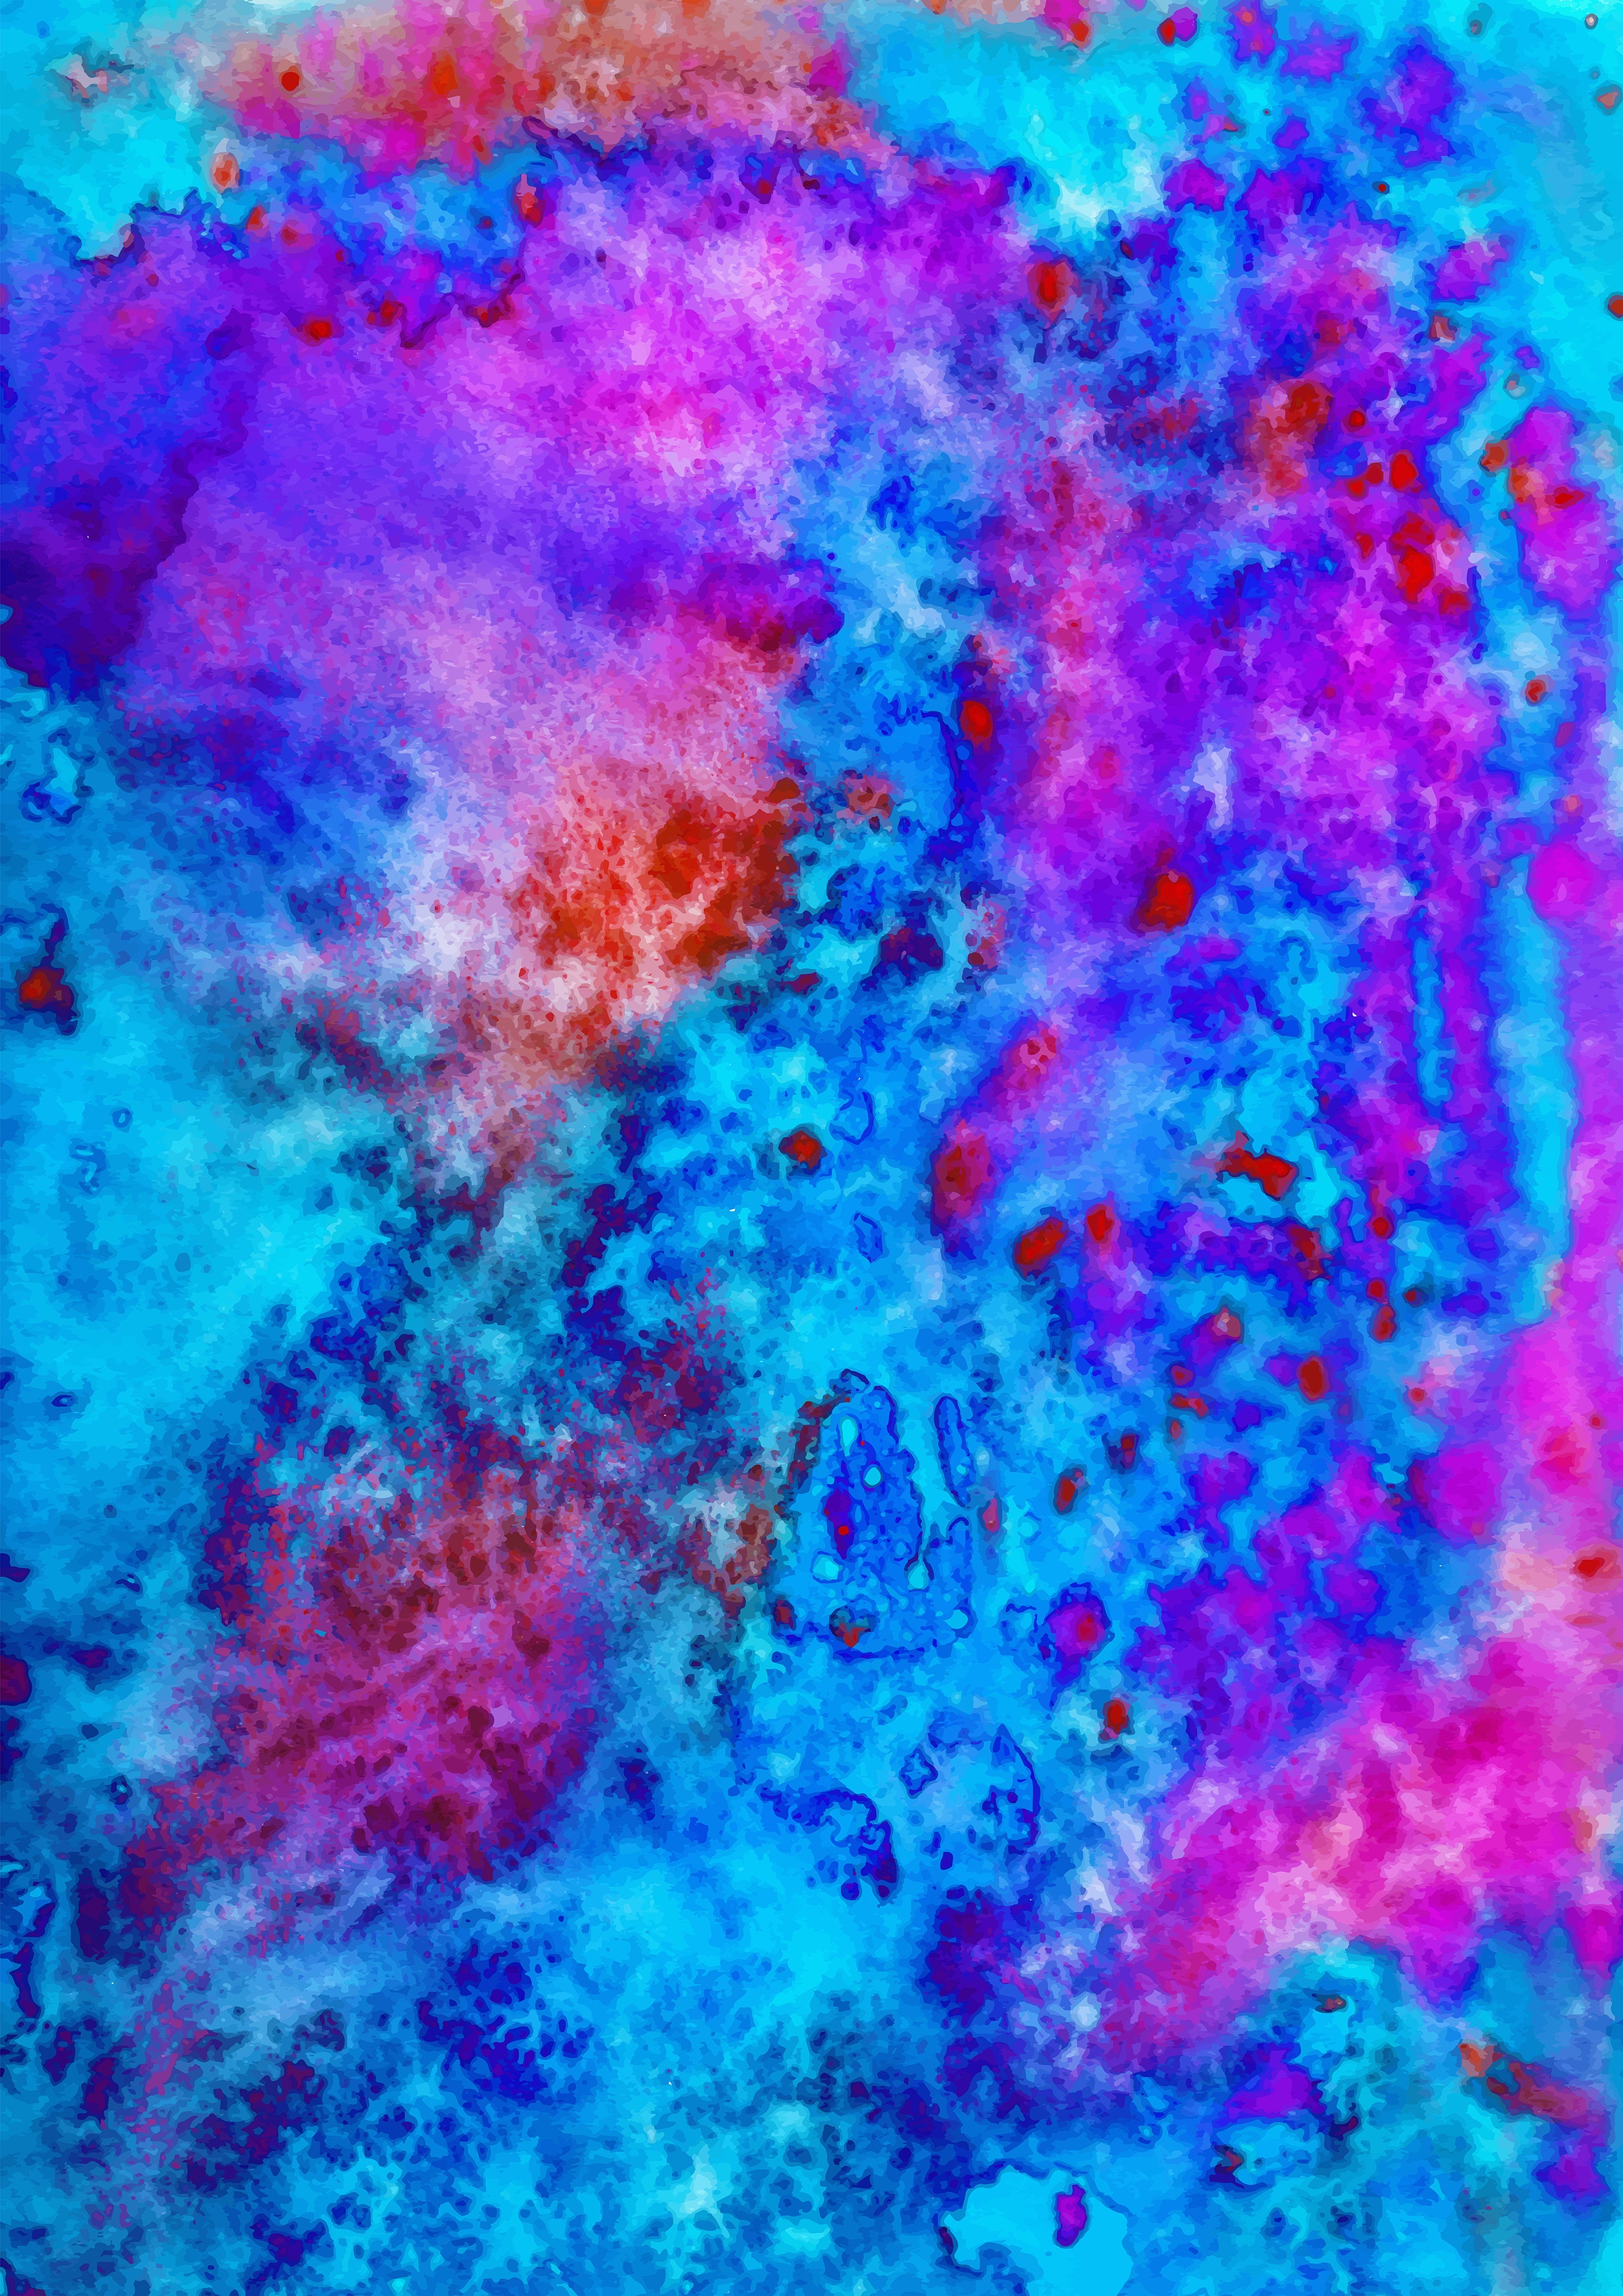 Widescreen image paint, stains, spots, abstract